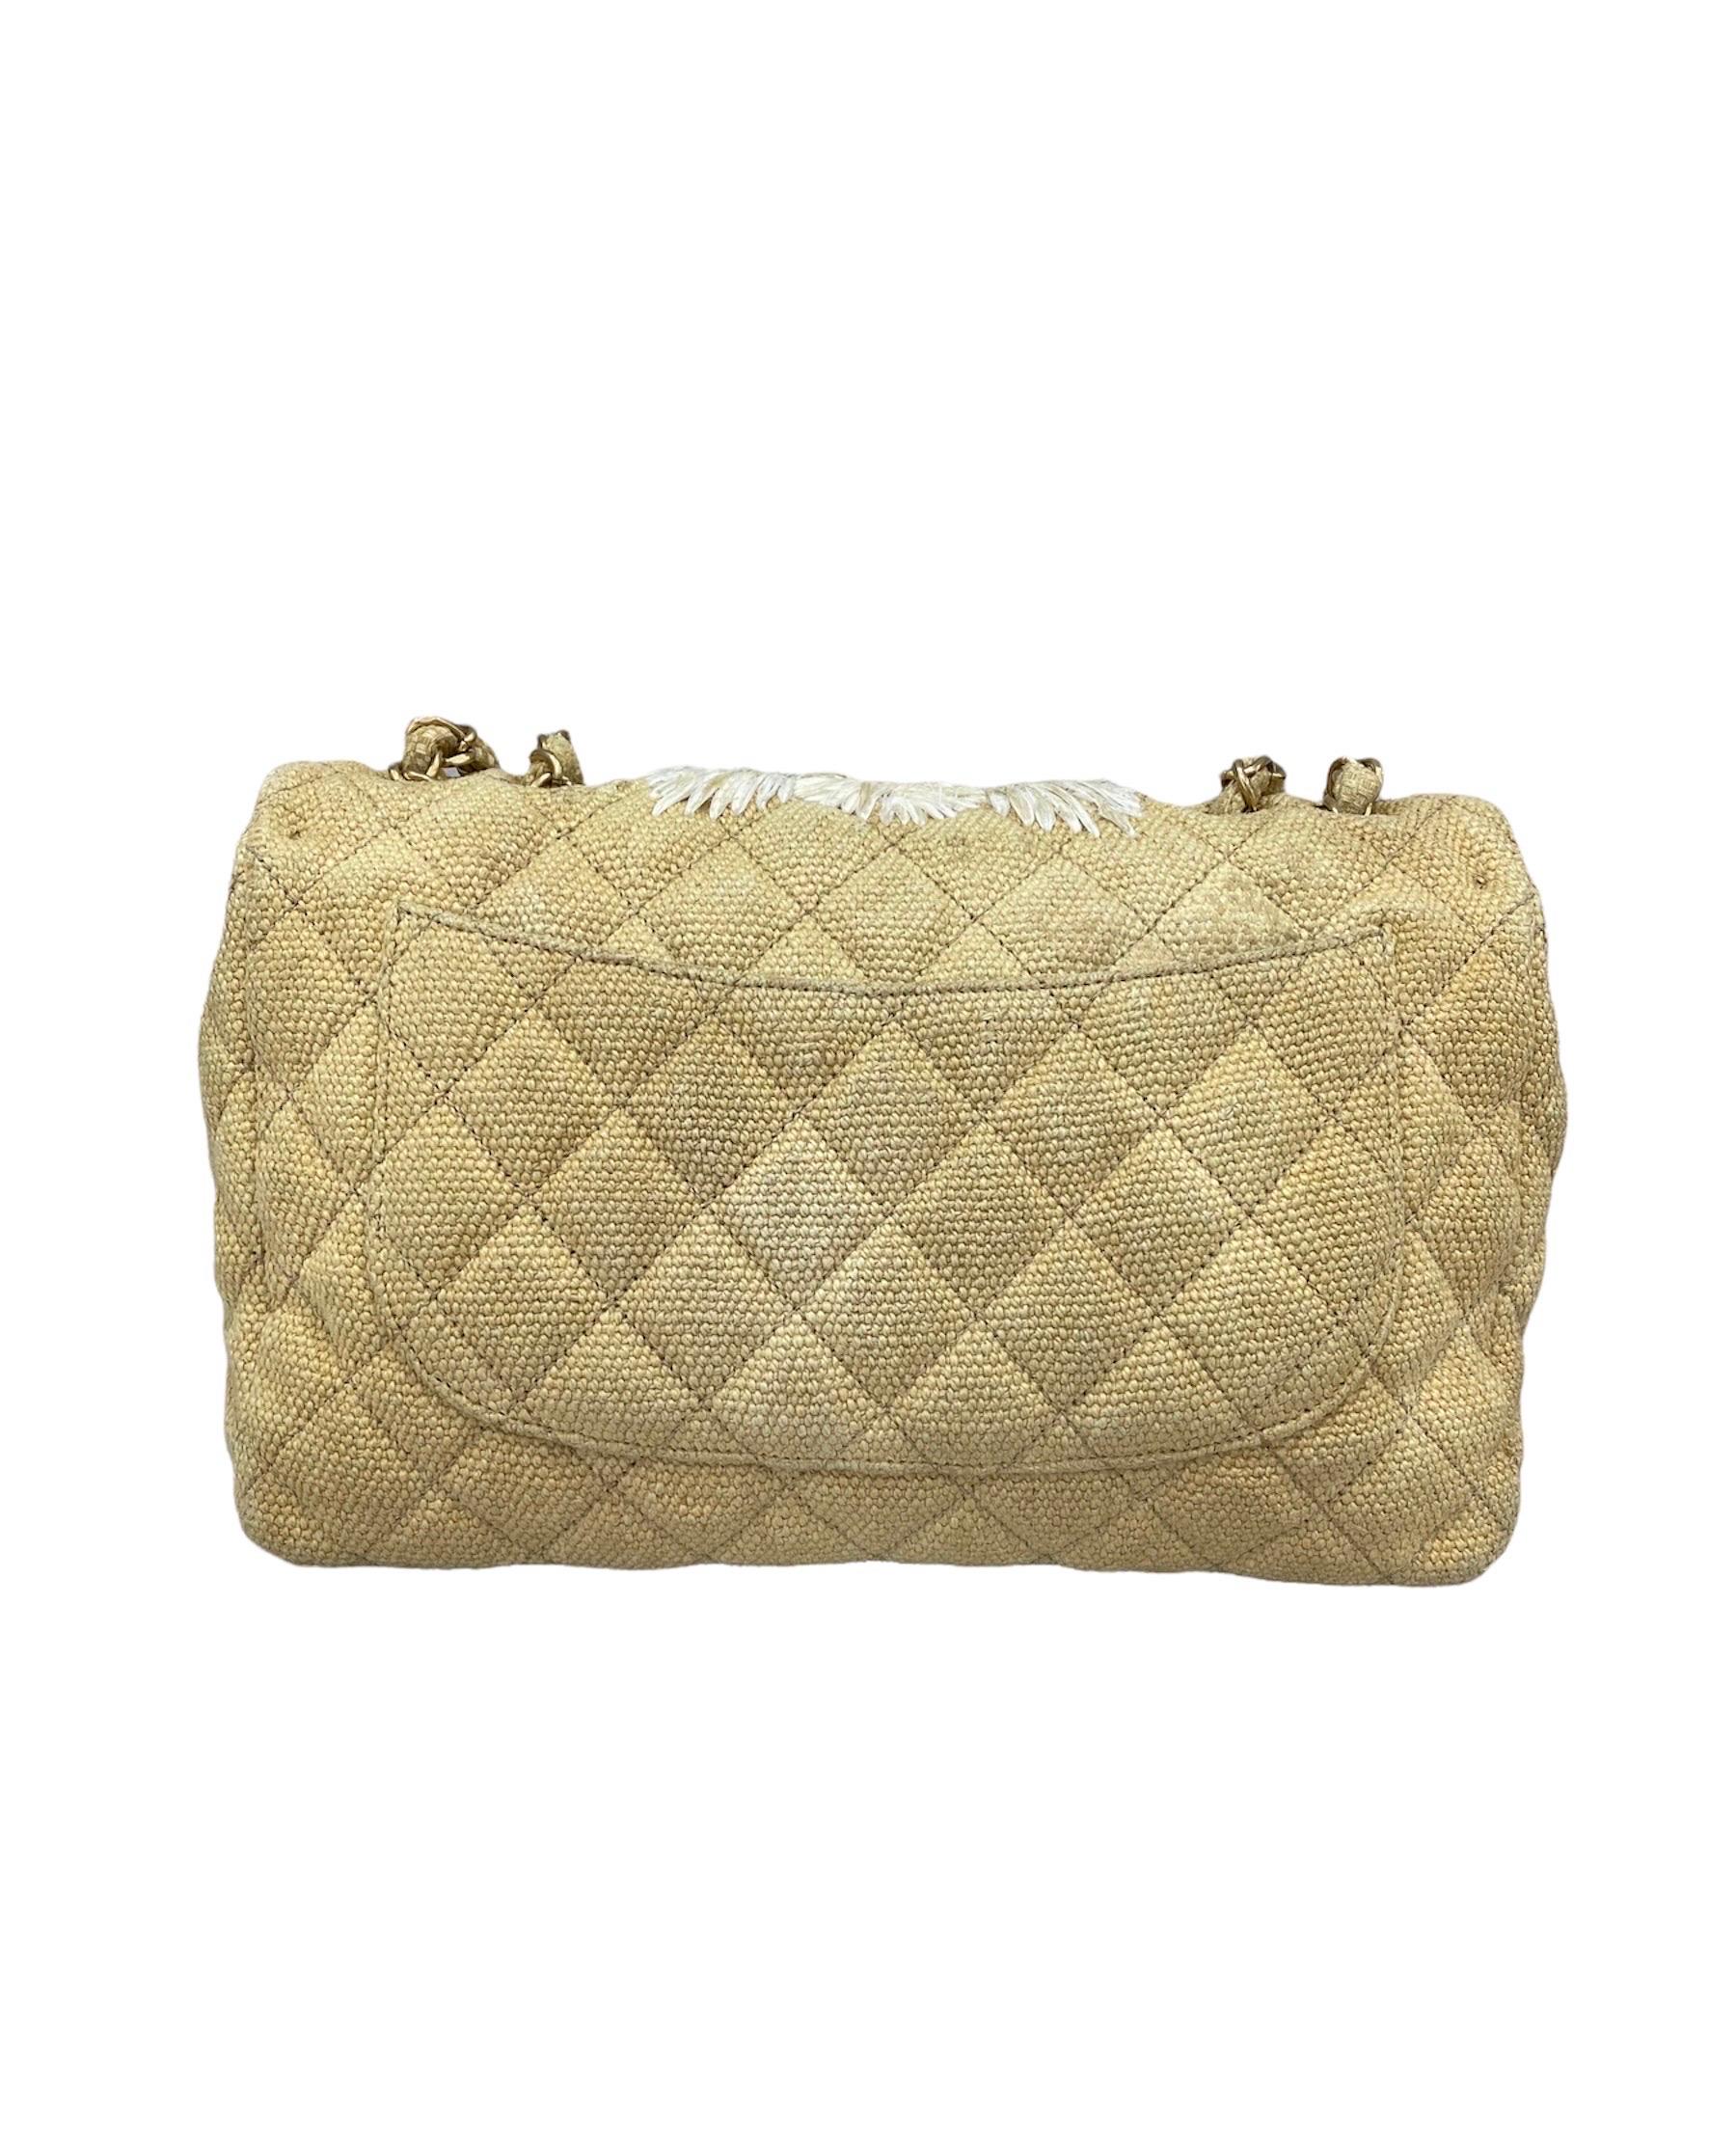 Chanel Flap Beige Canvas Flowers  For Sale 1